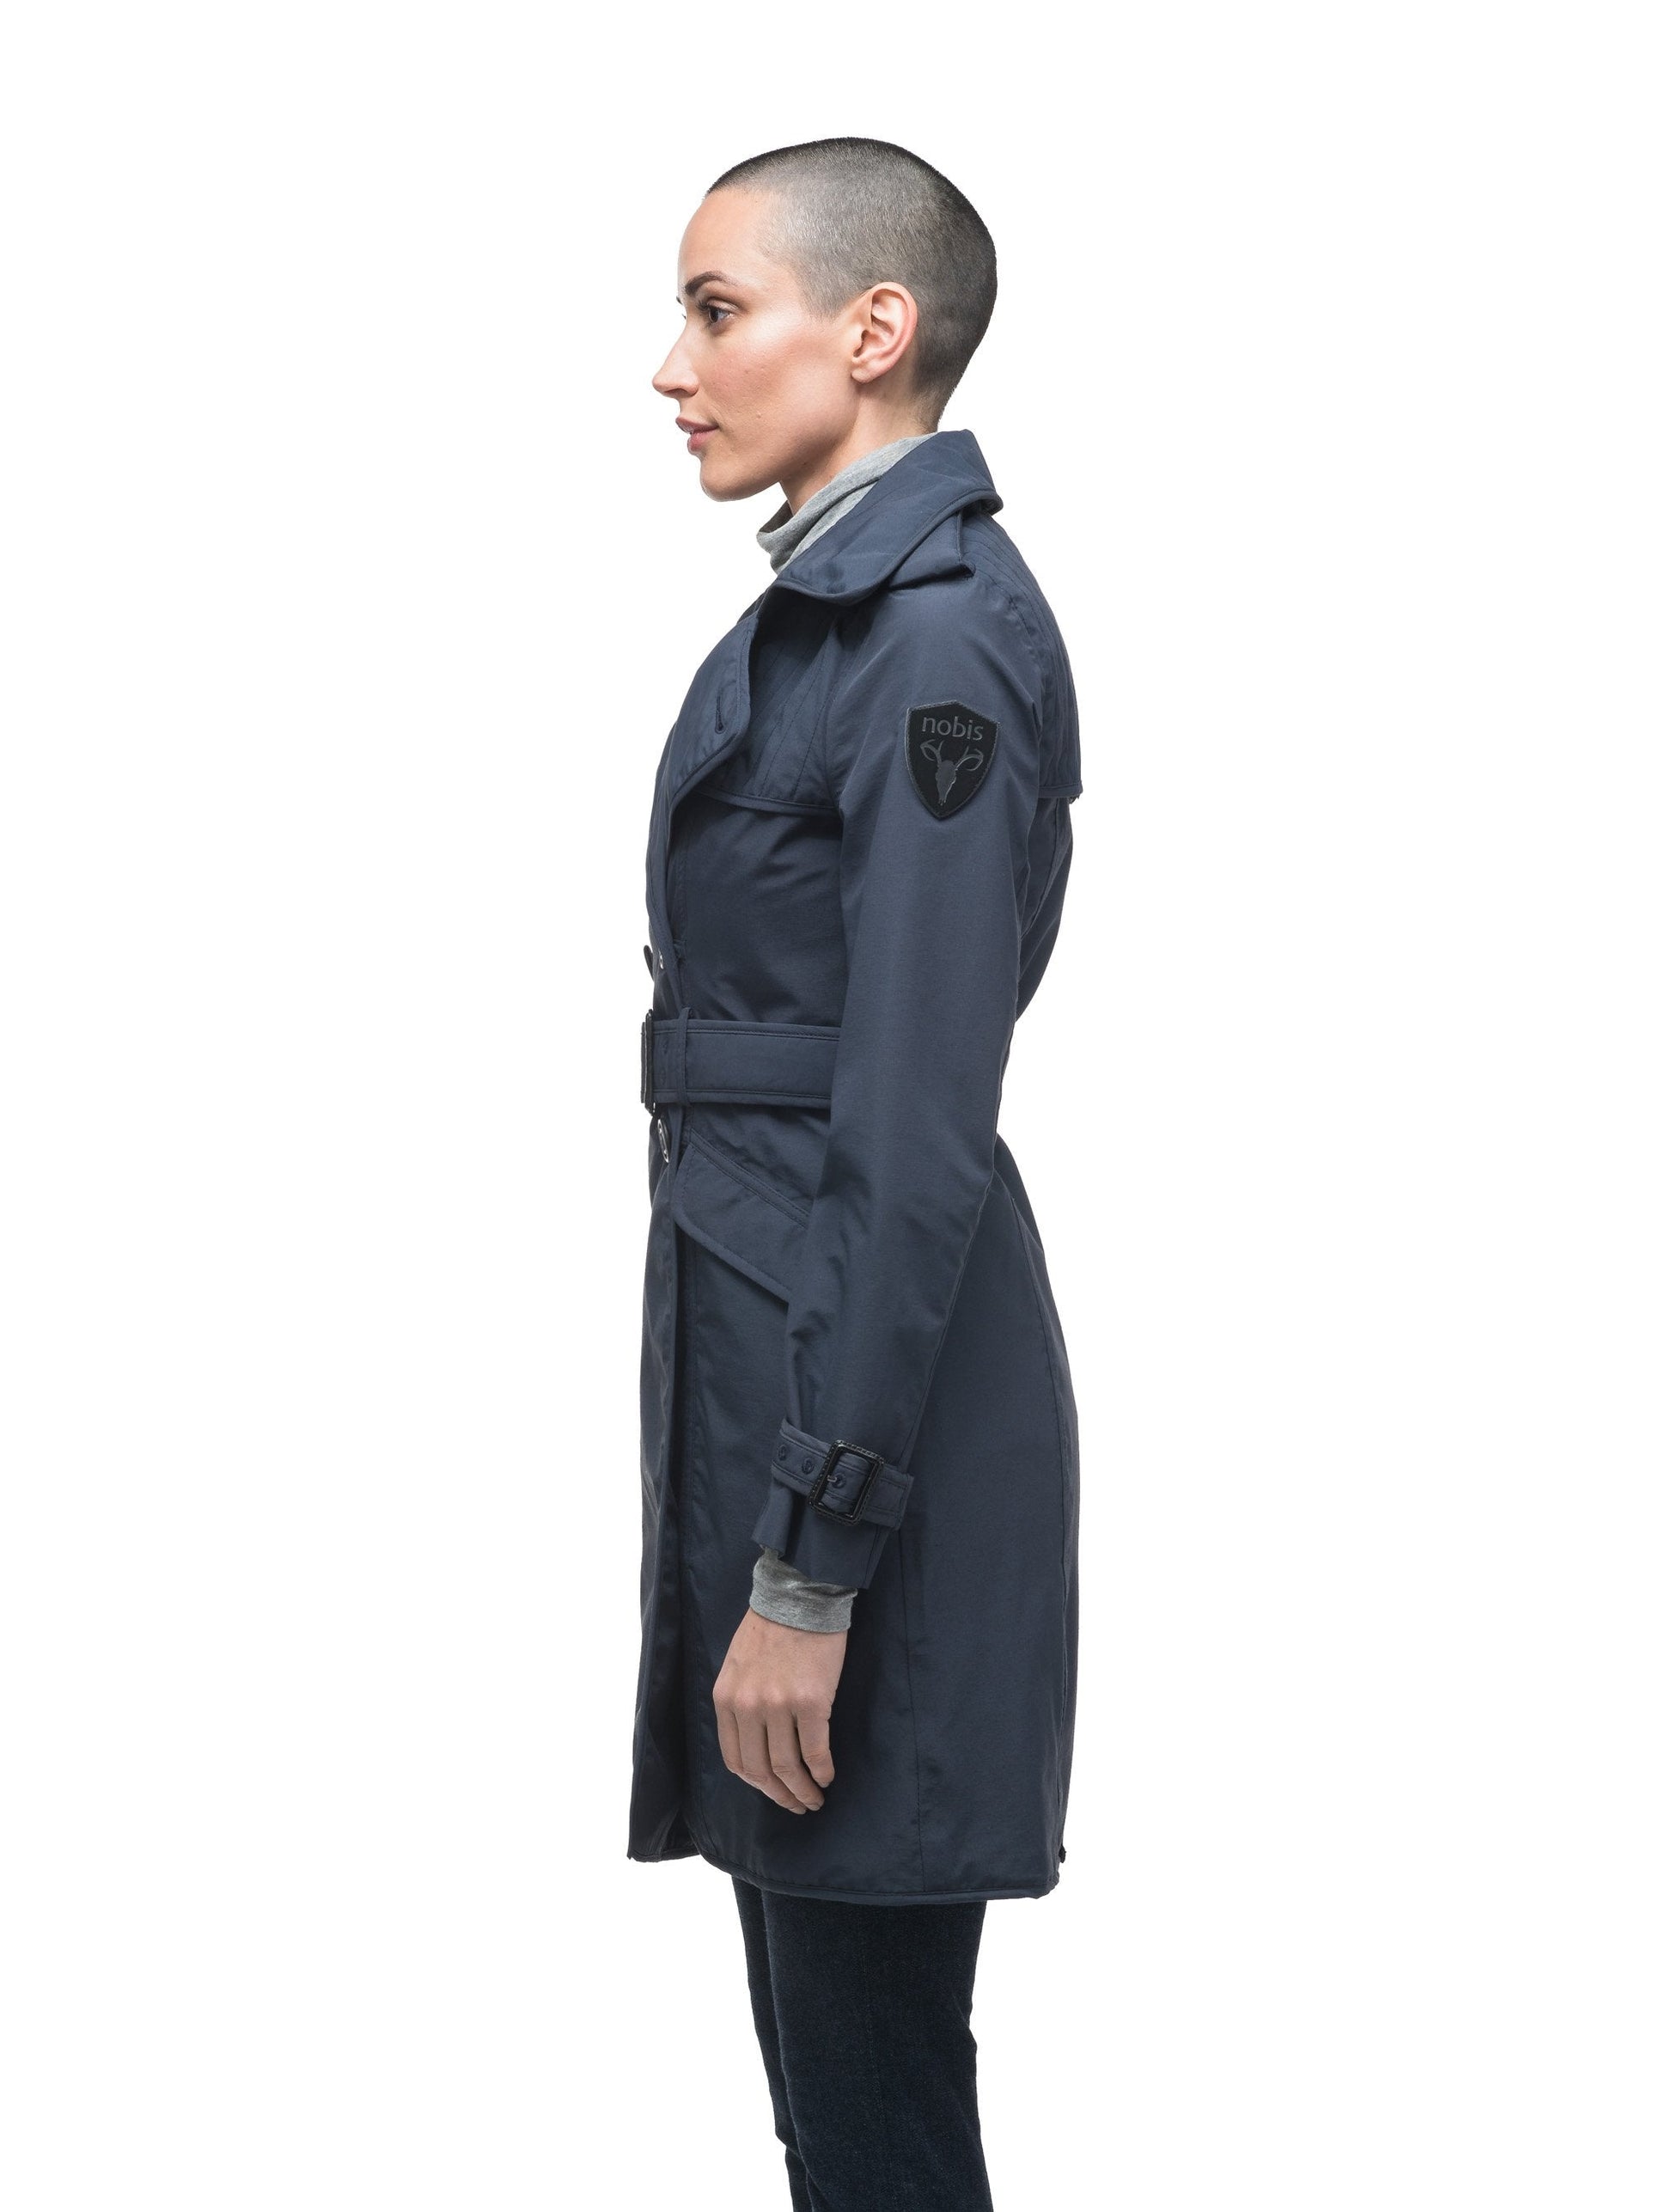 Women's classic trench coat that falls just above the knee in Navy